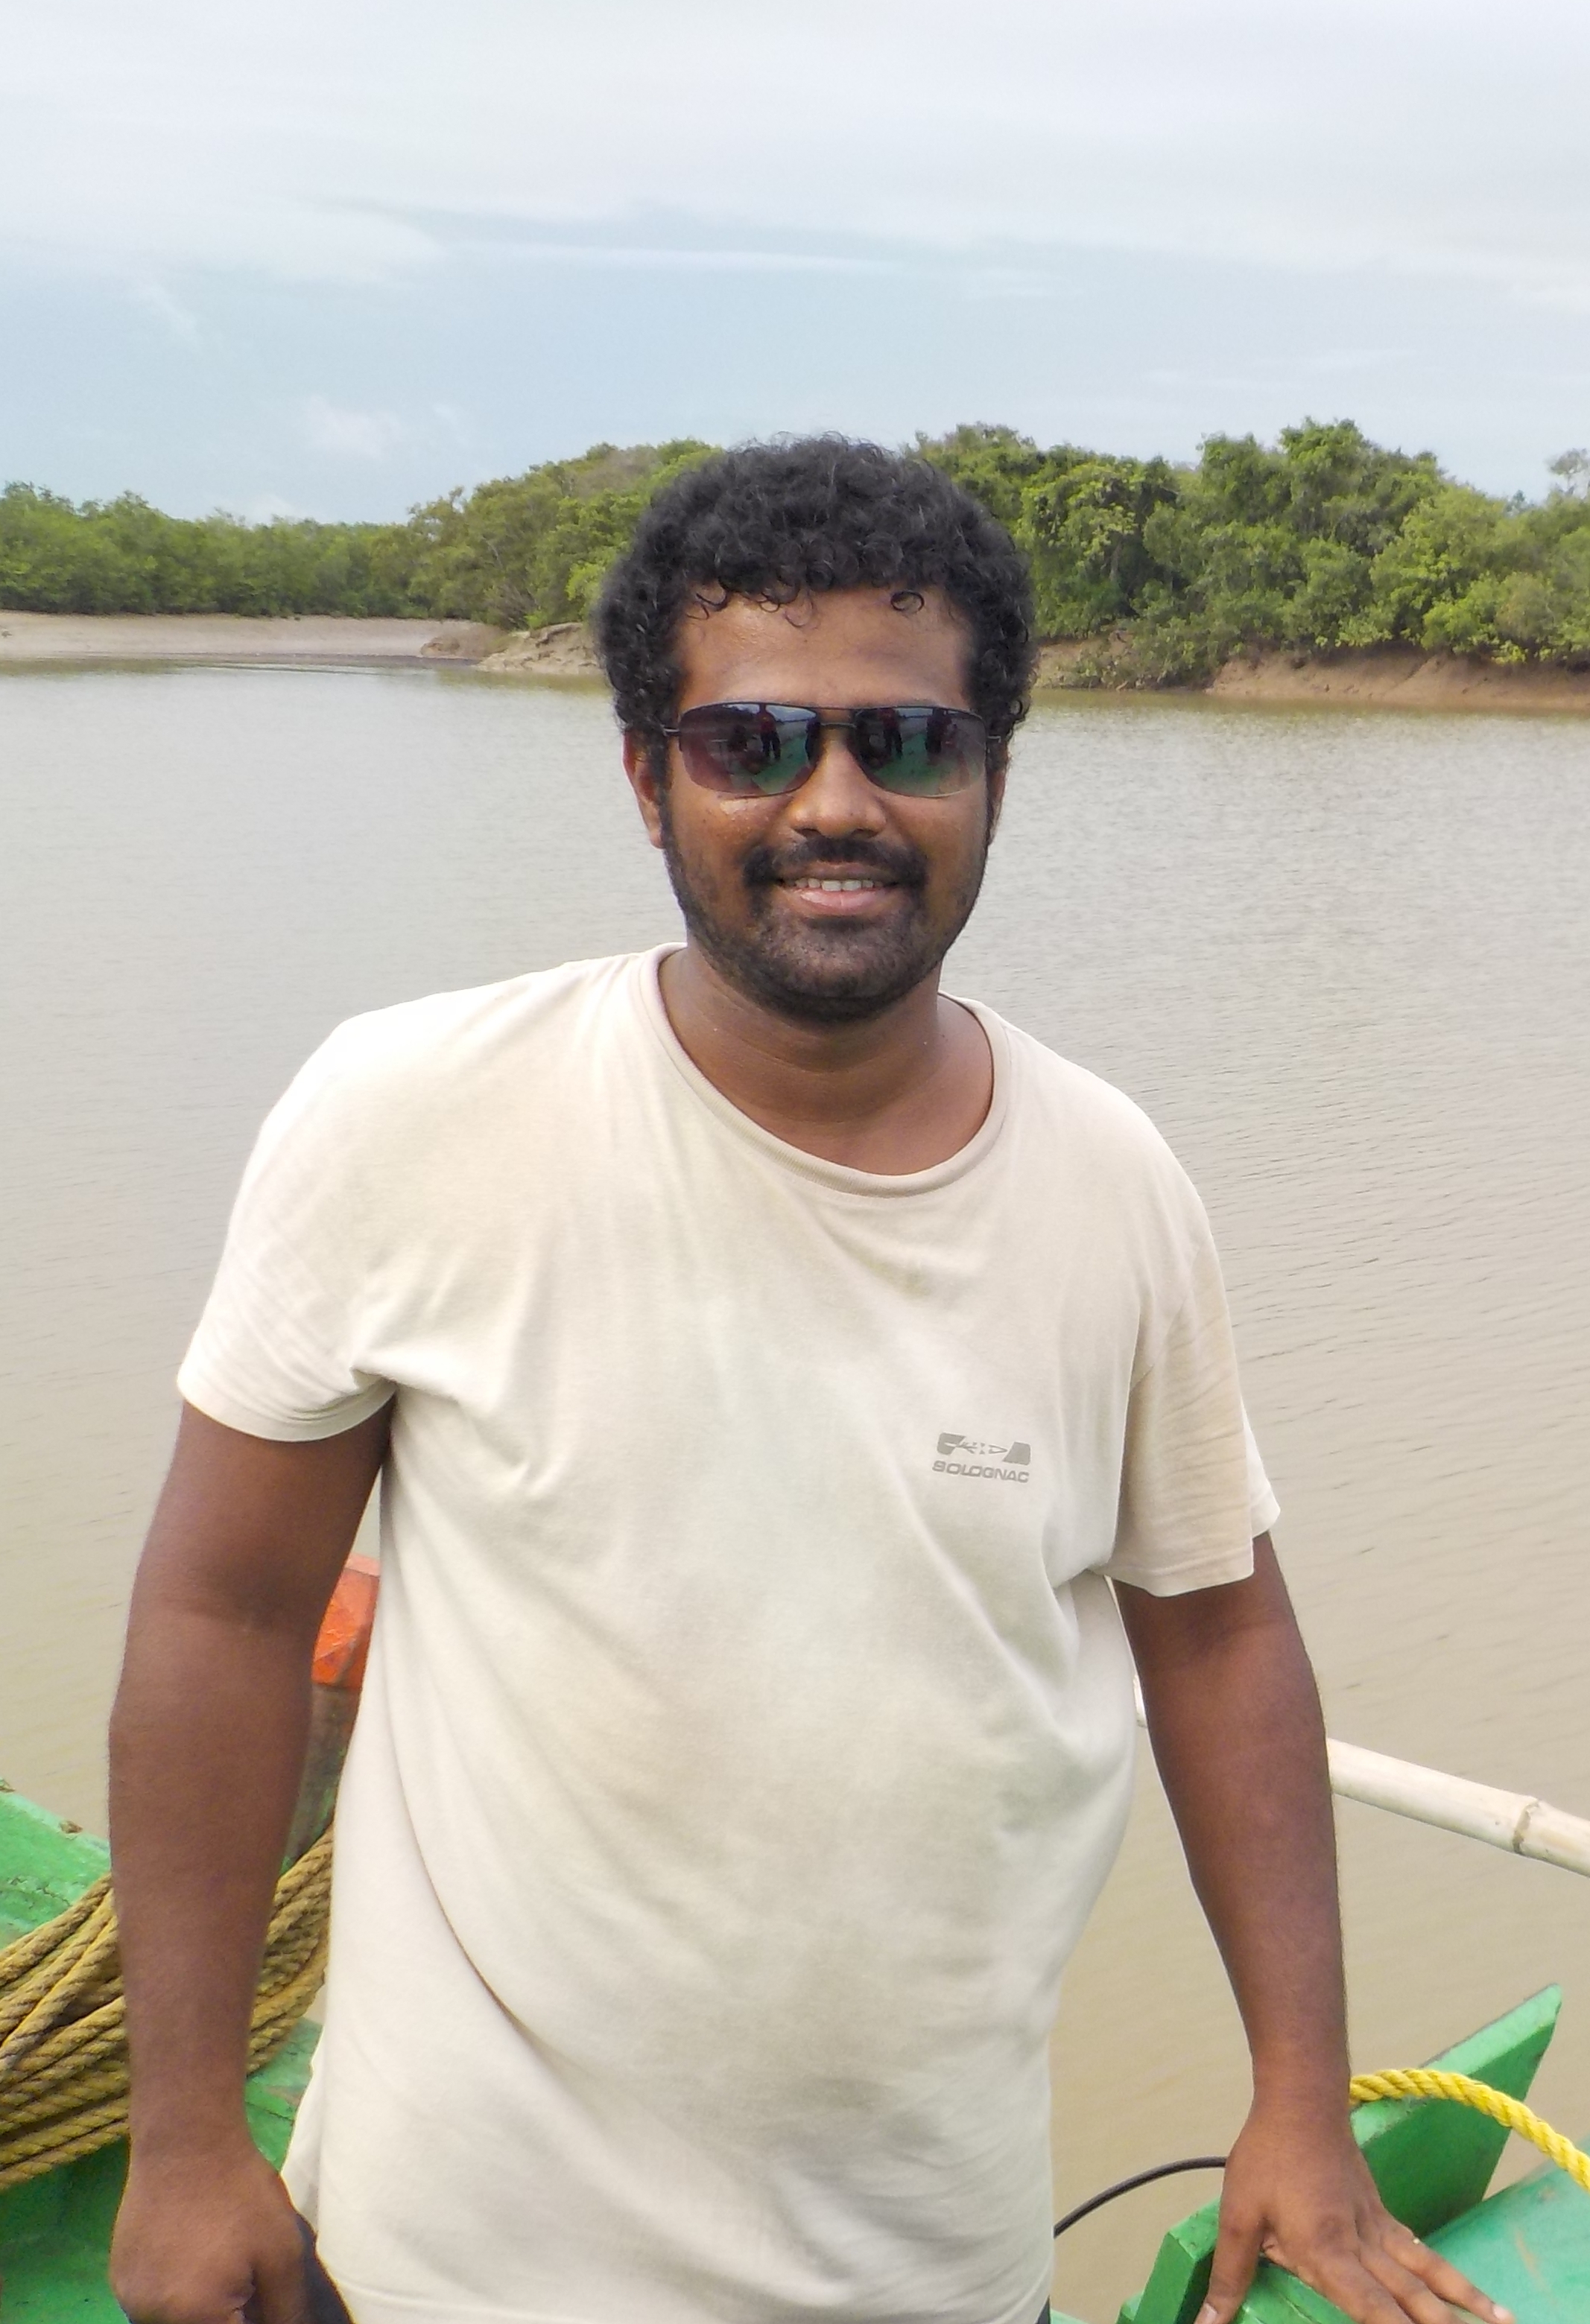 Ravi wearing sunglasses smiling at the camera. He is standing, with a body of water and mud banks and vegetation in the background.